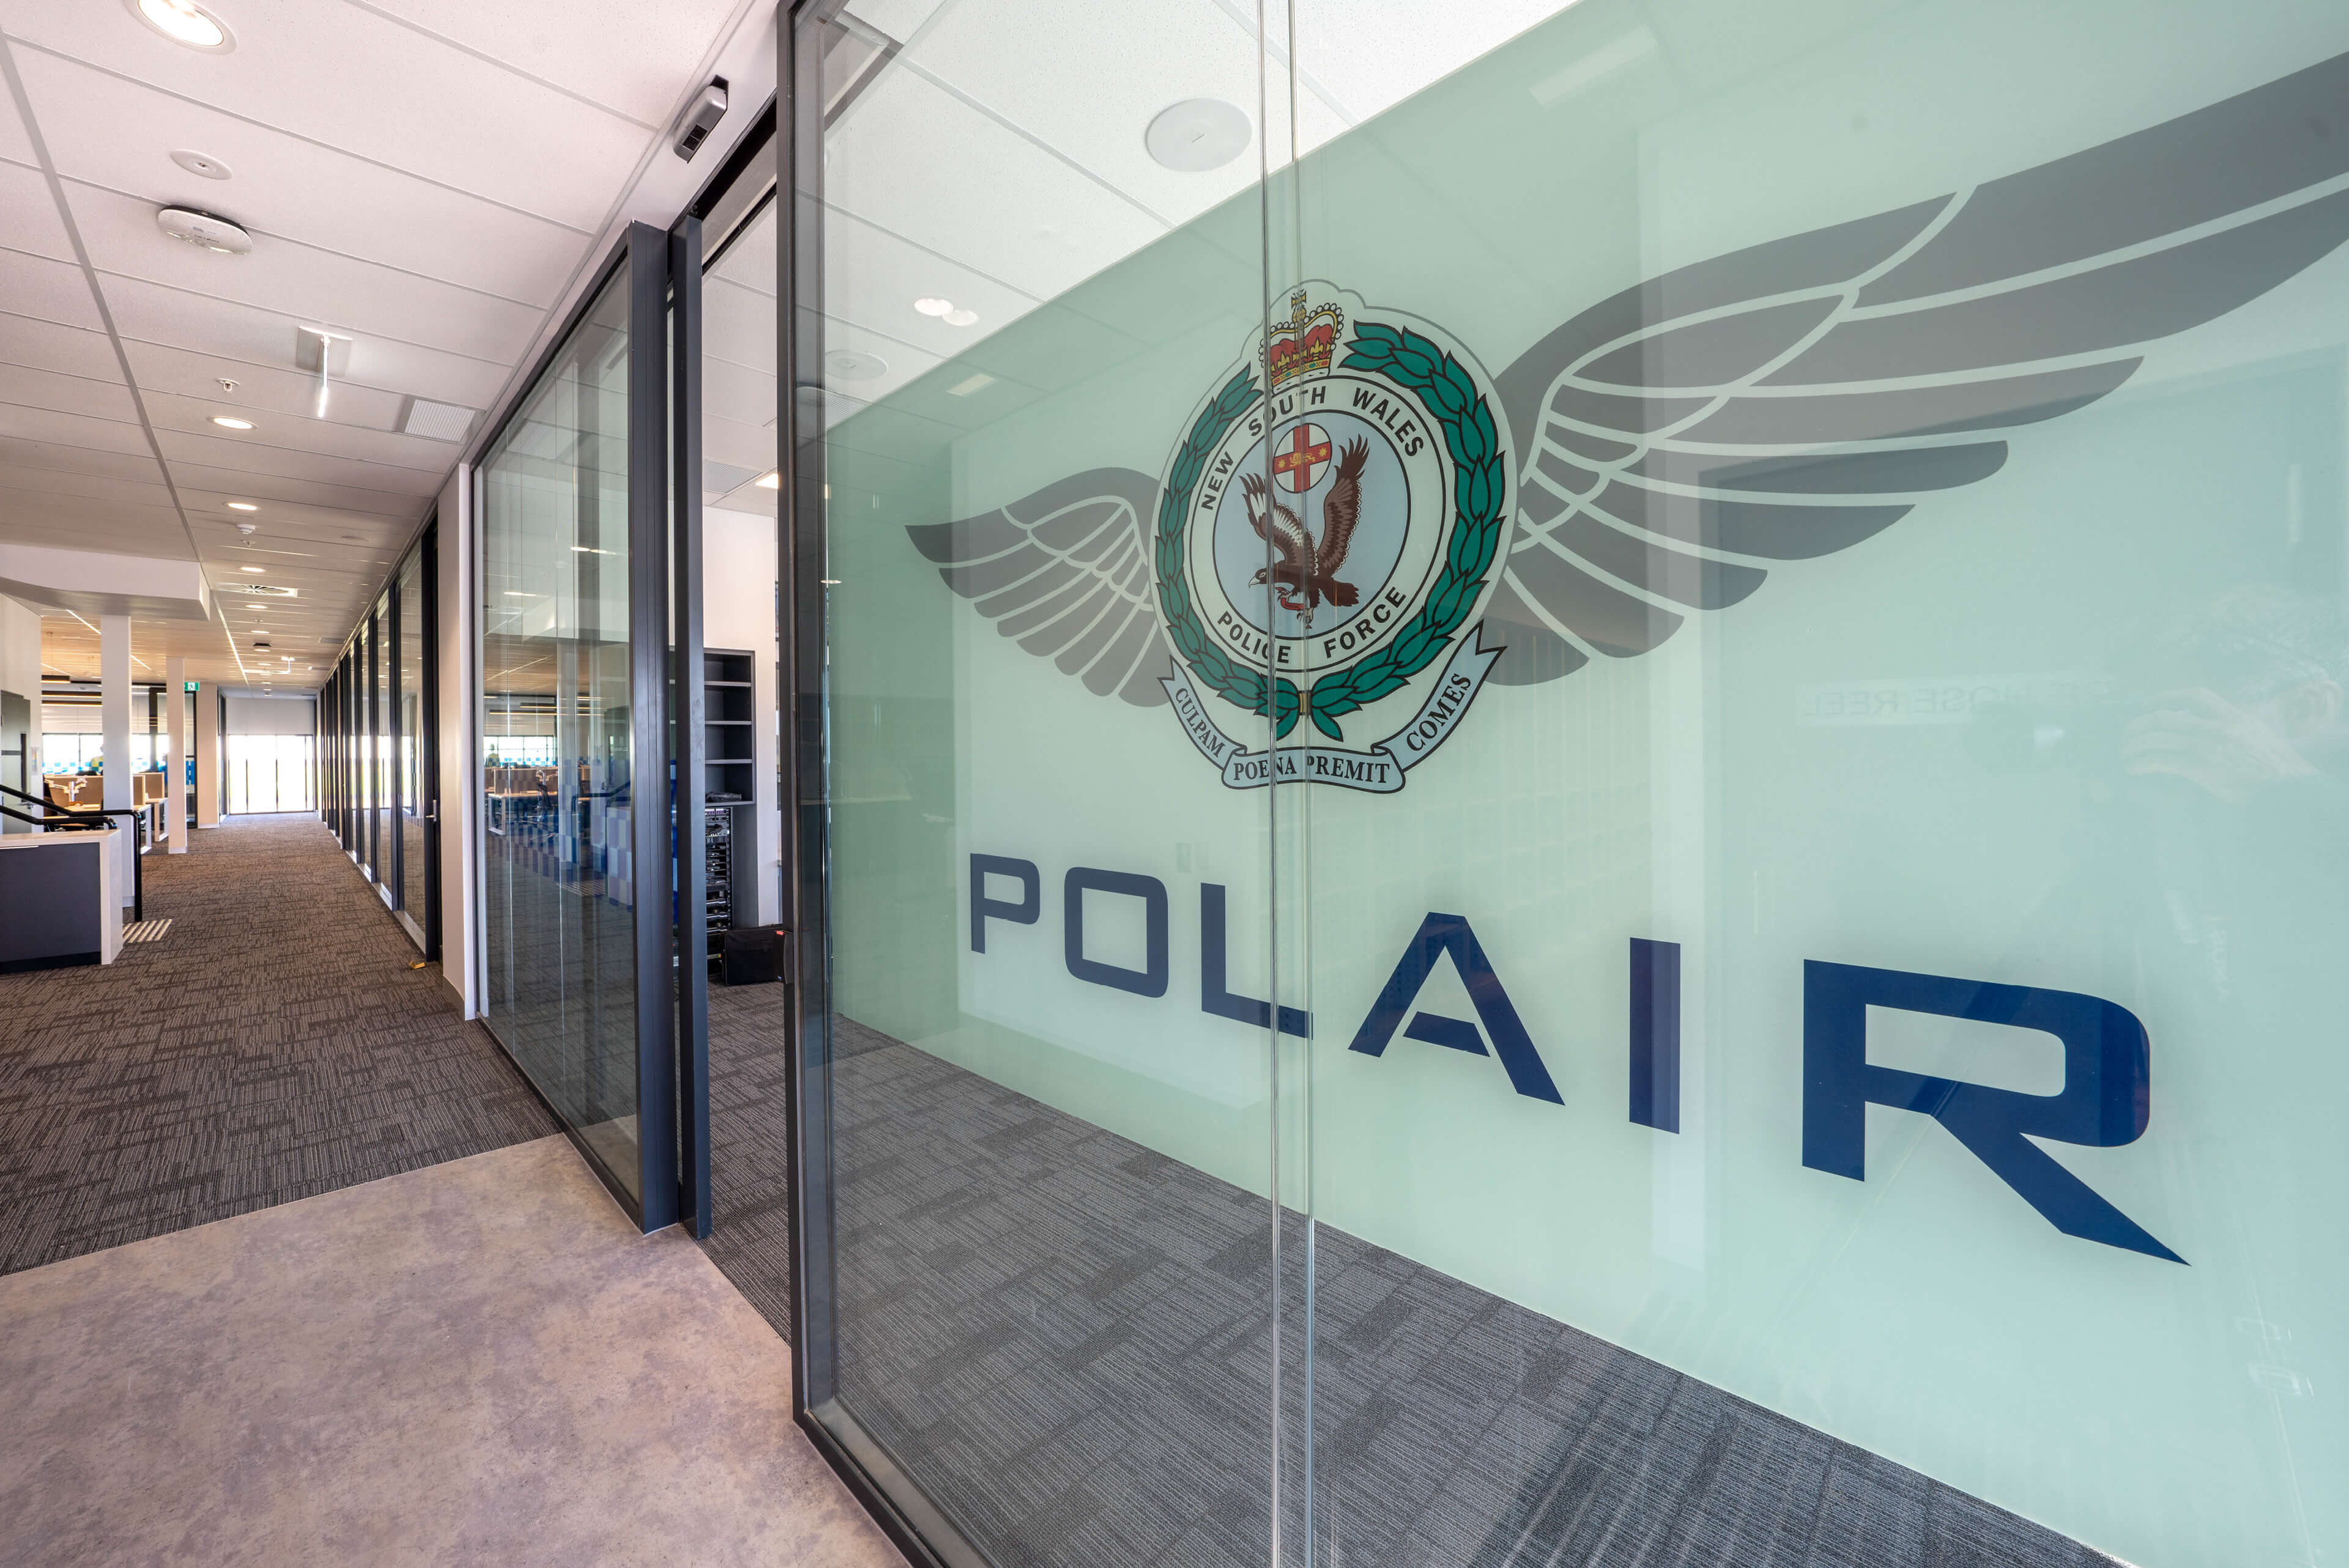 16 polair glazing signage at entrance to office space at polair facility bankstown taylor construction refurbishment and live environments